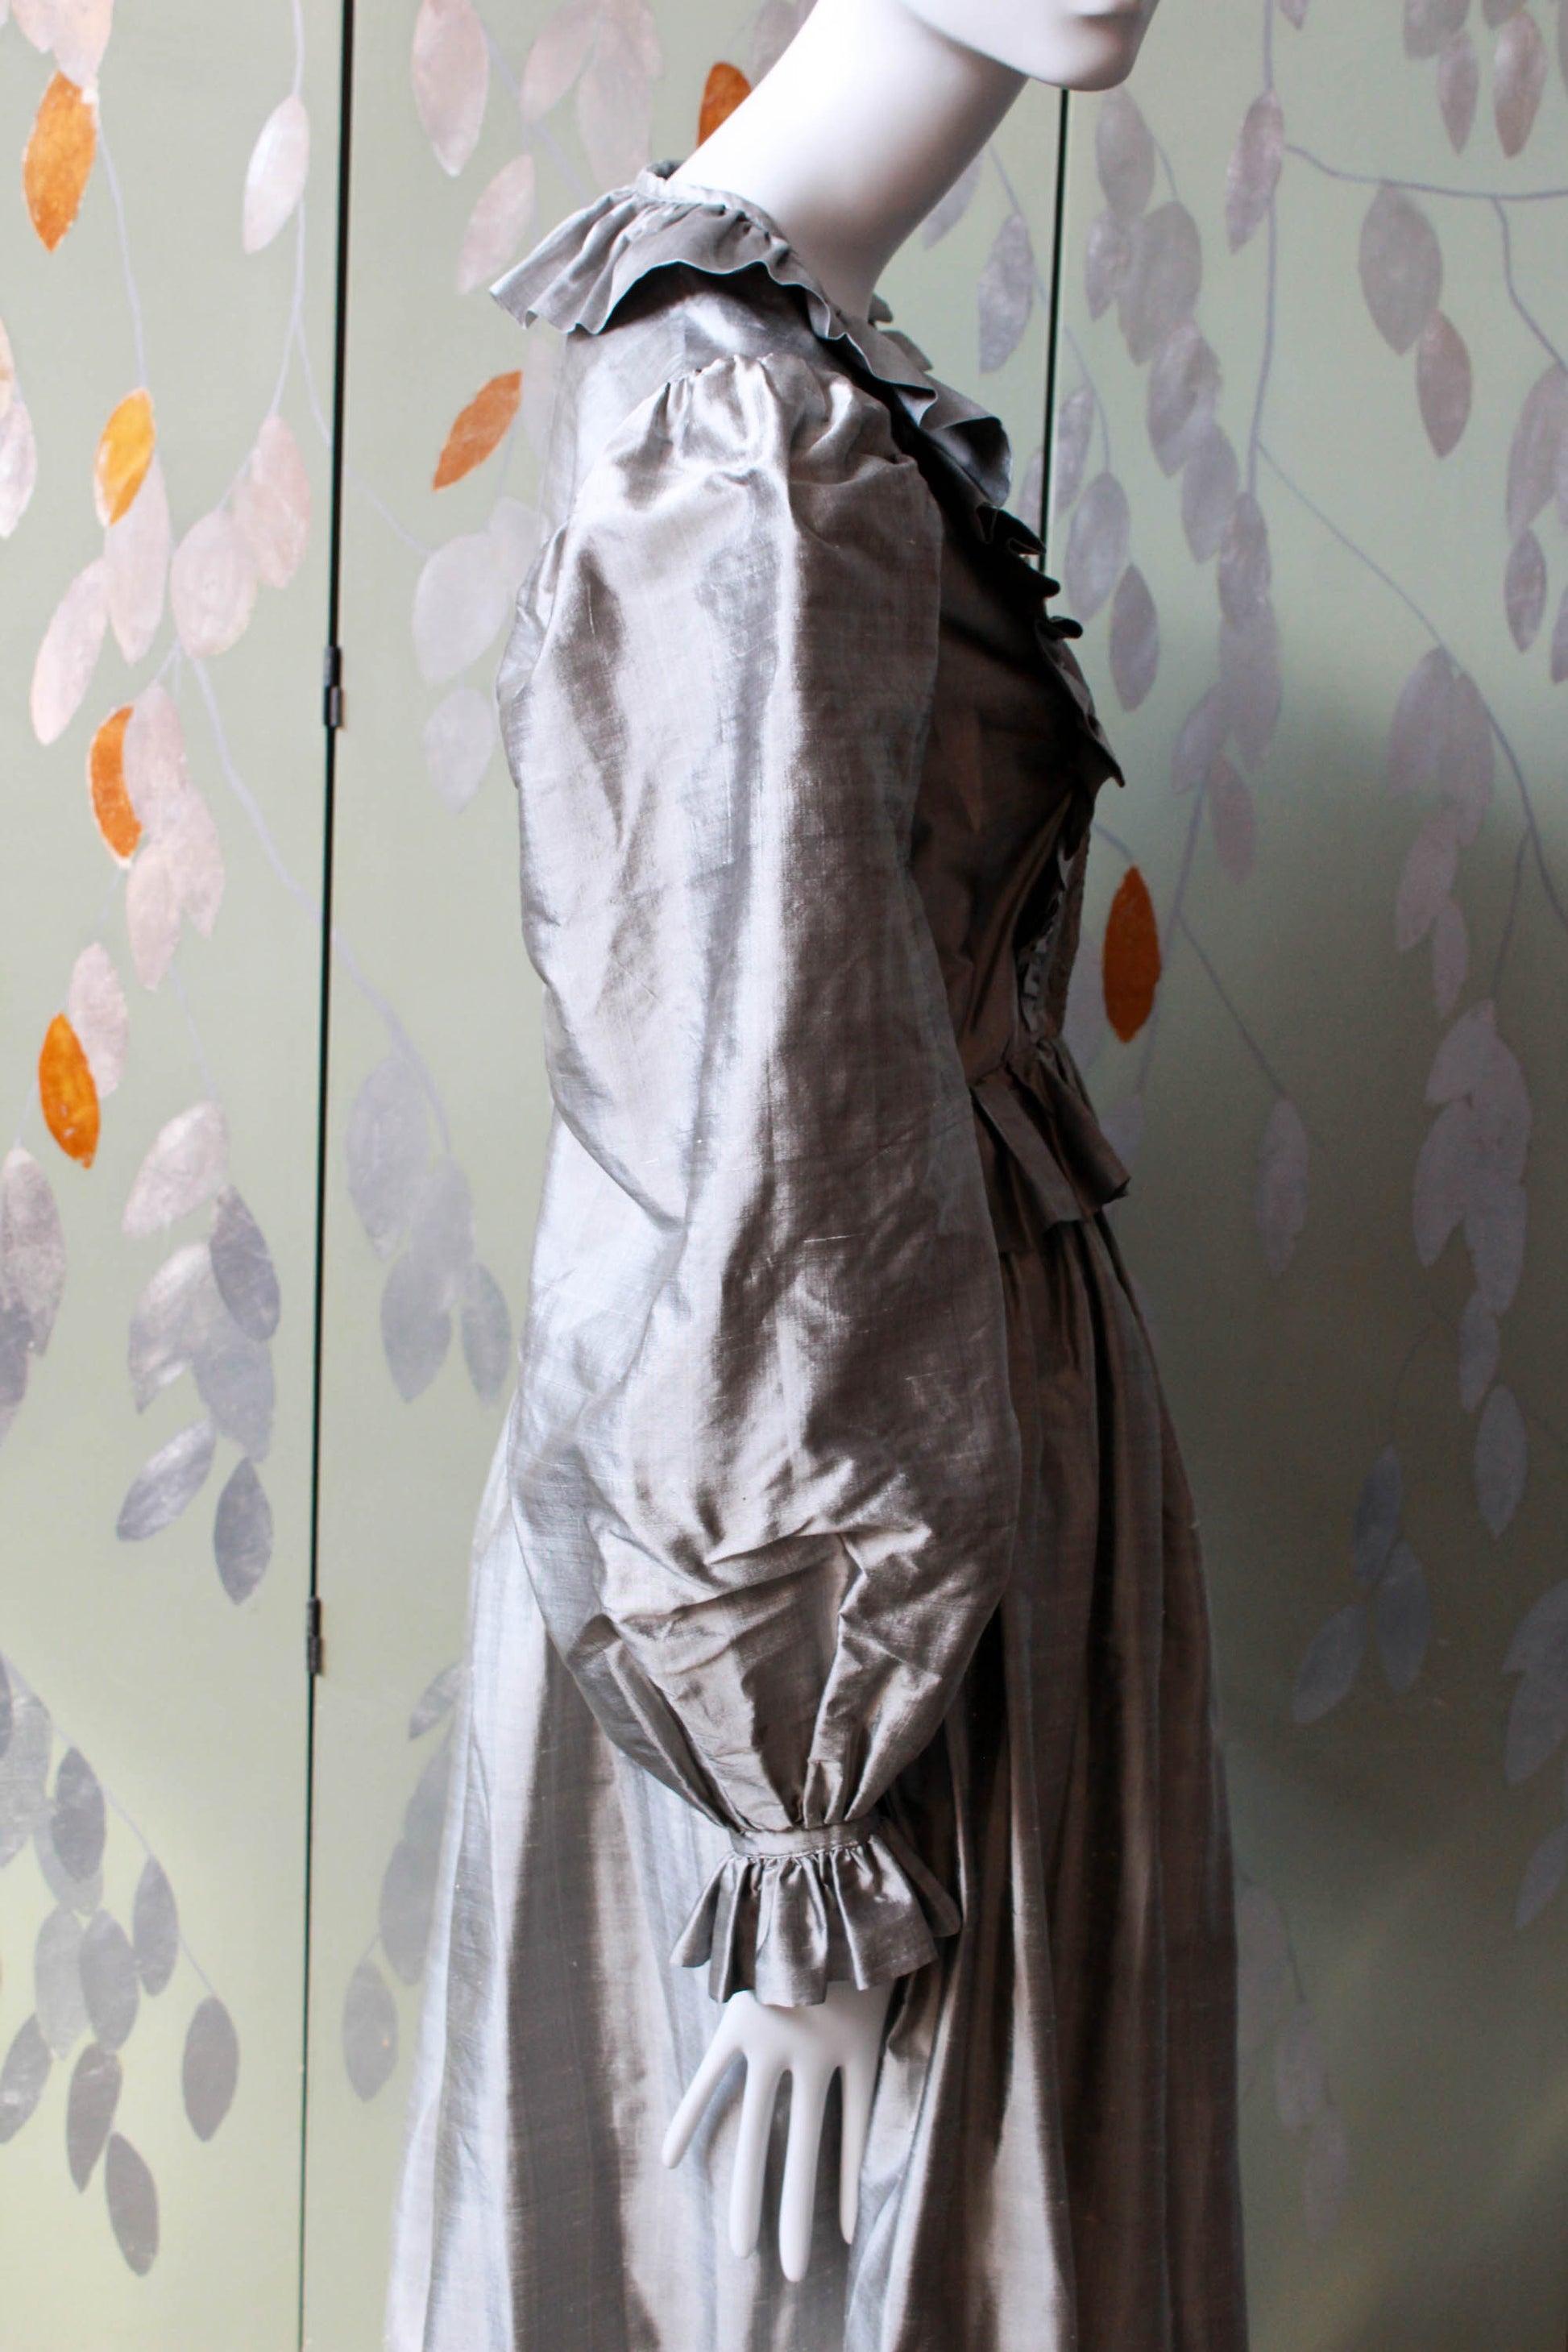 1980s pewter grey/shimmering silk blouse and skirt with ruffled detail on the front, lace panel overlay, corset style blouse with large puff sleeves and gathered full skirt with ruffle hem, maxi length.